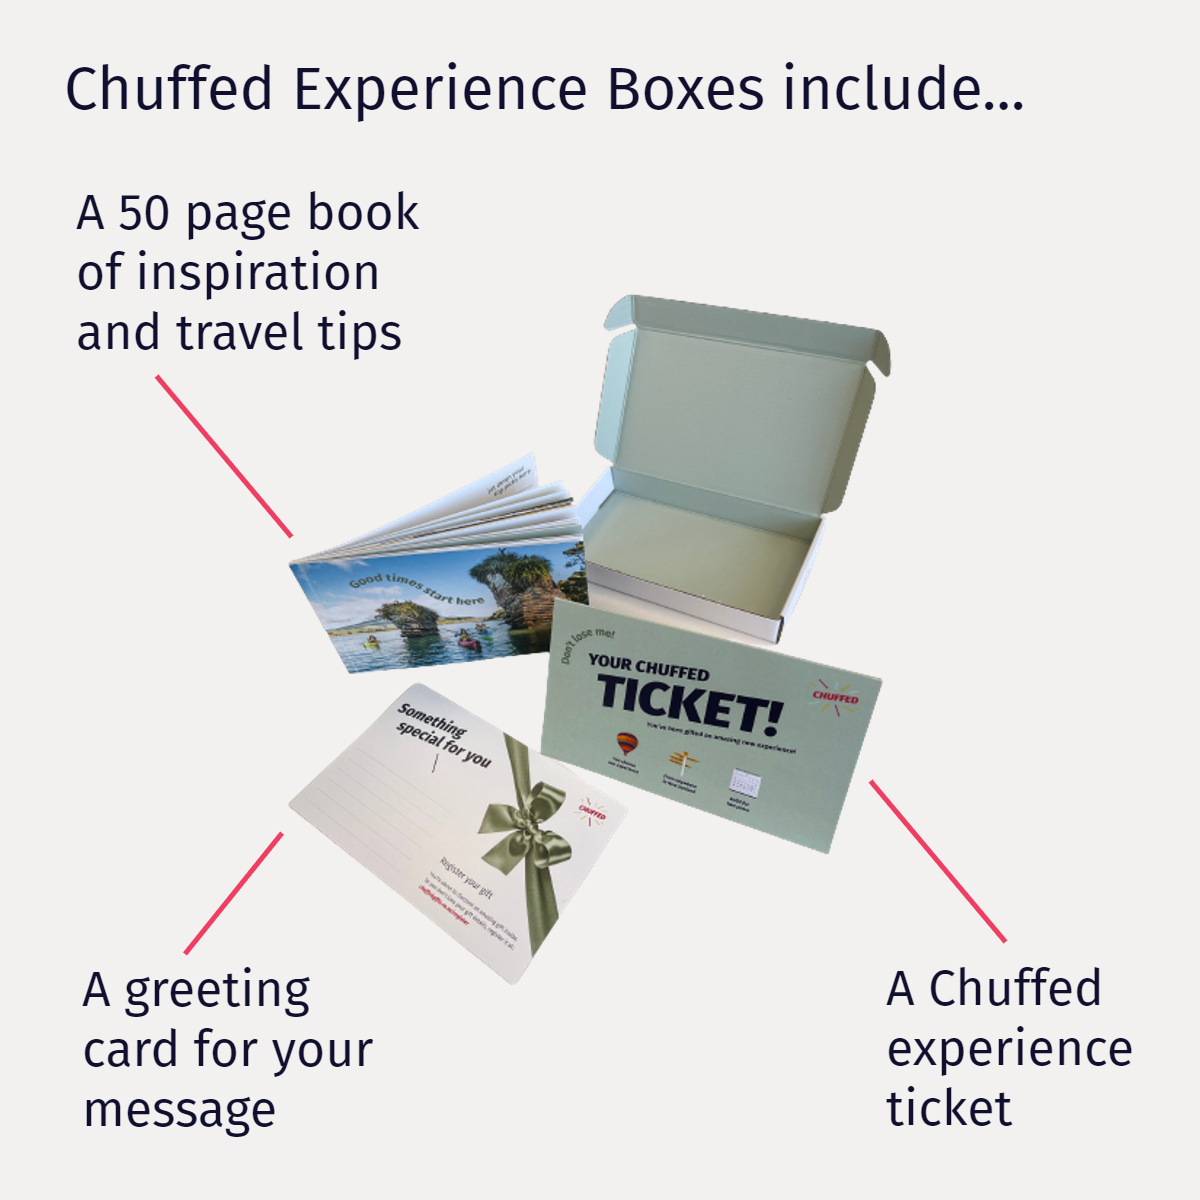 Here's what you get in a Chuffed Experience Gift Box